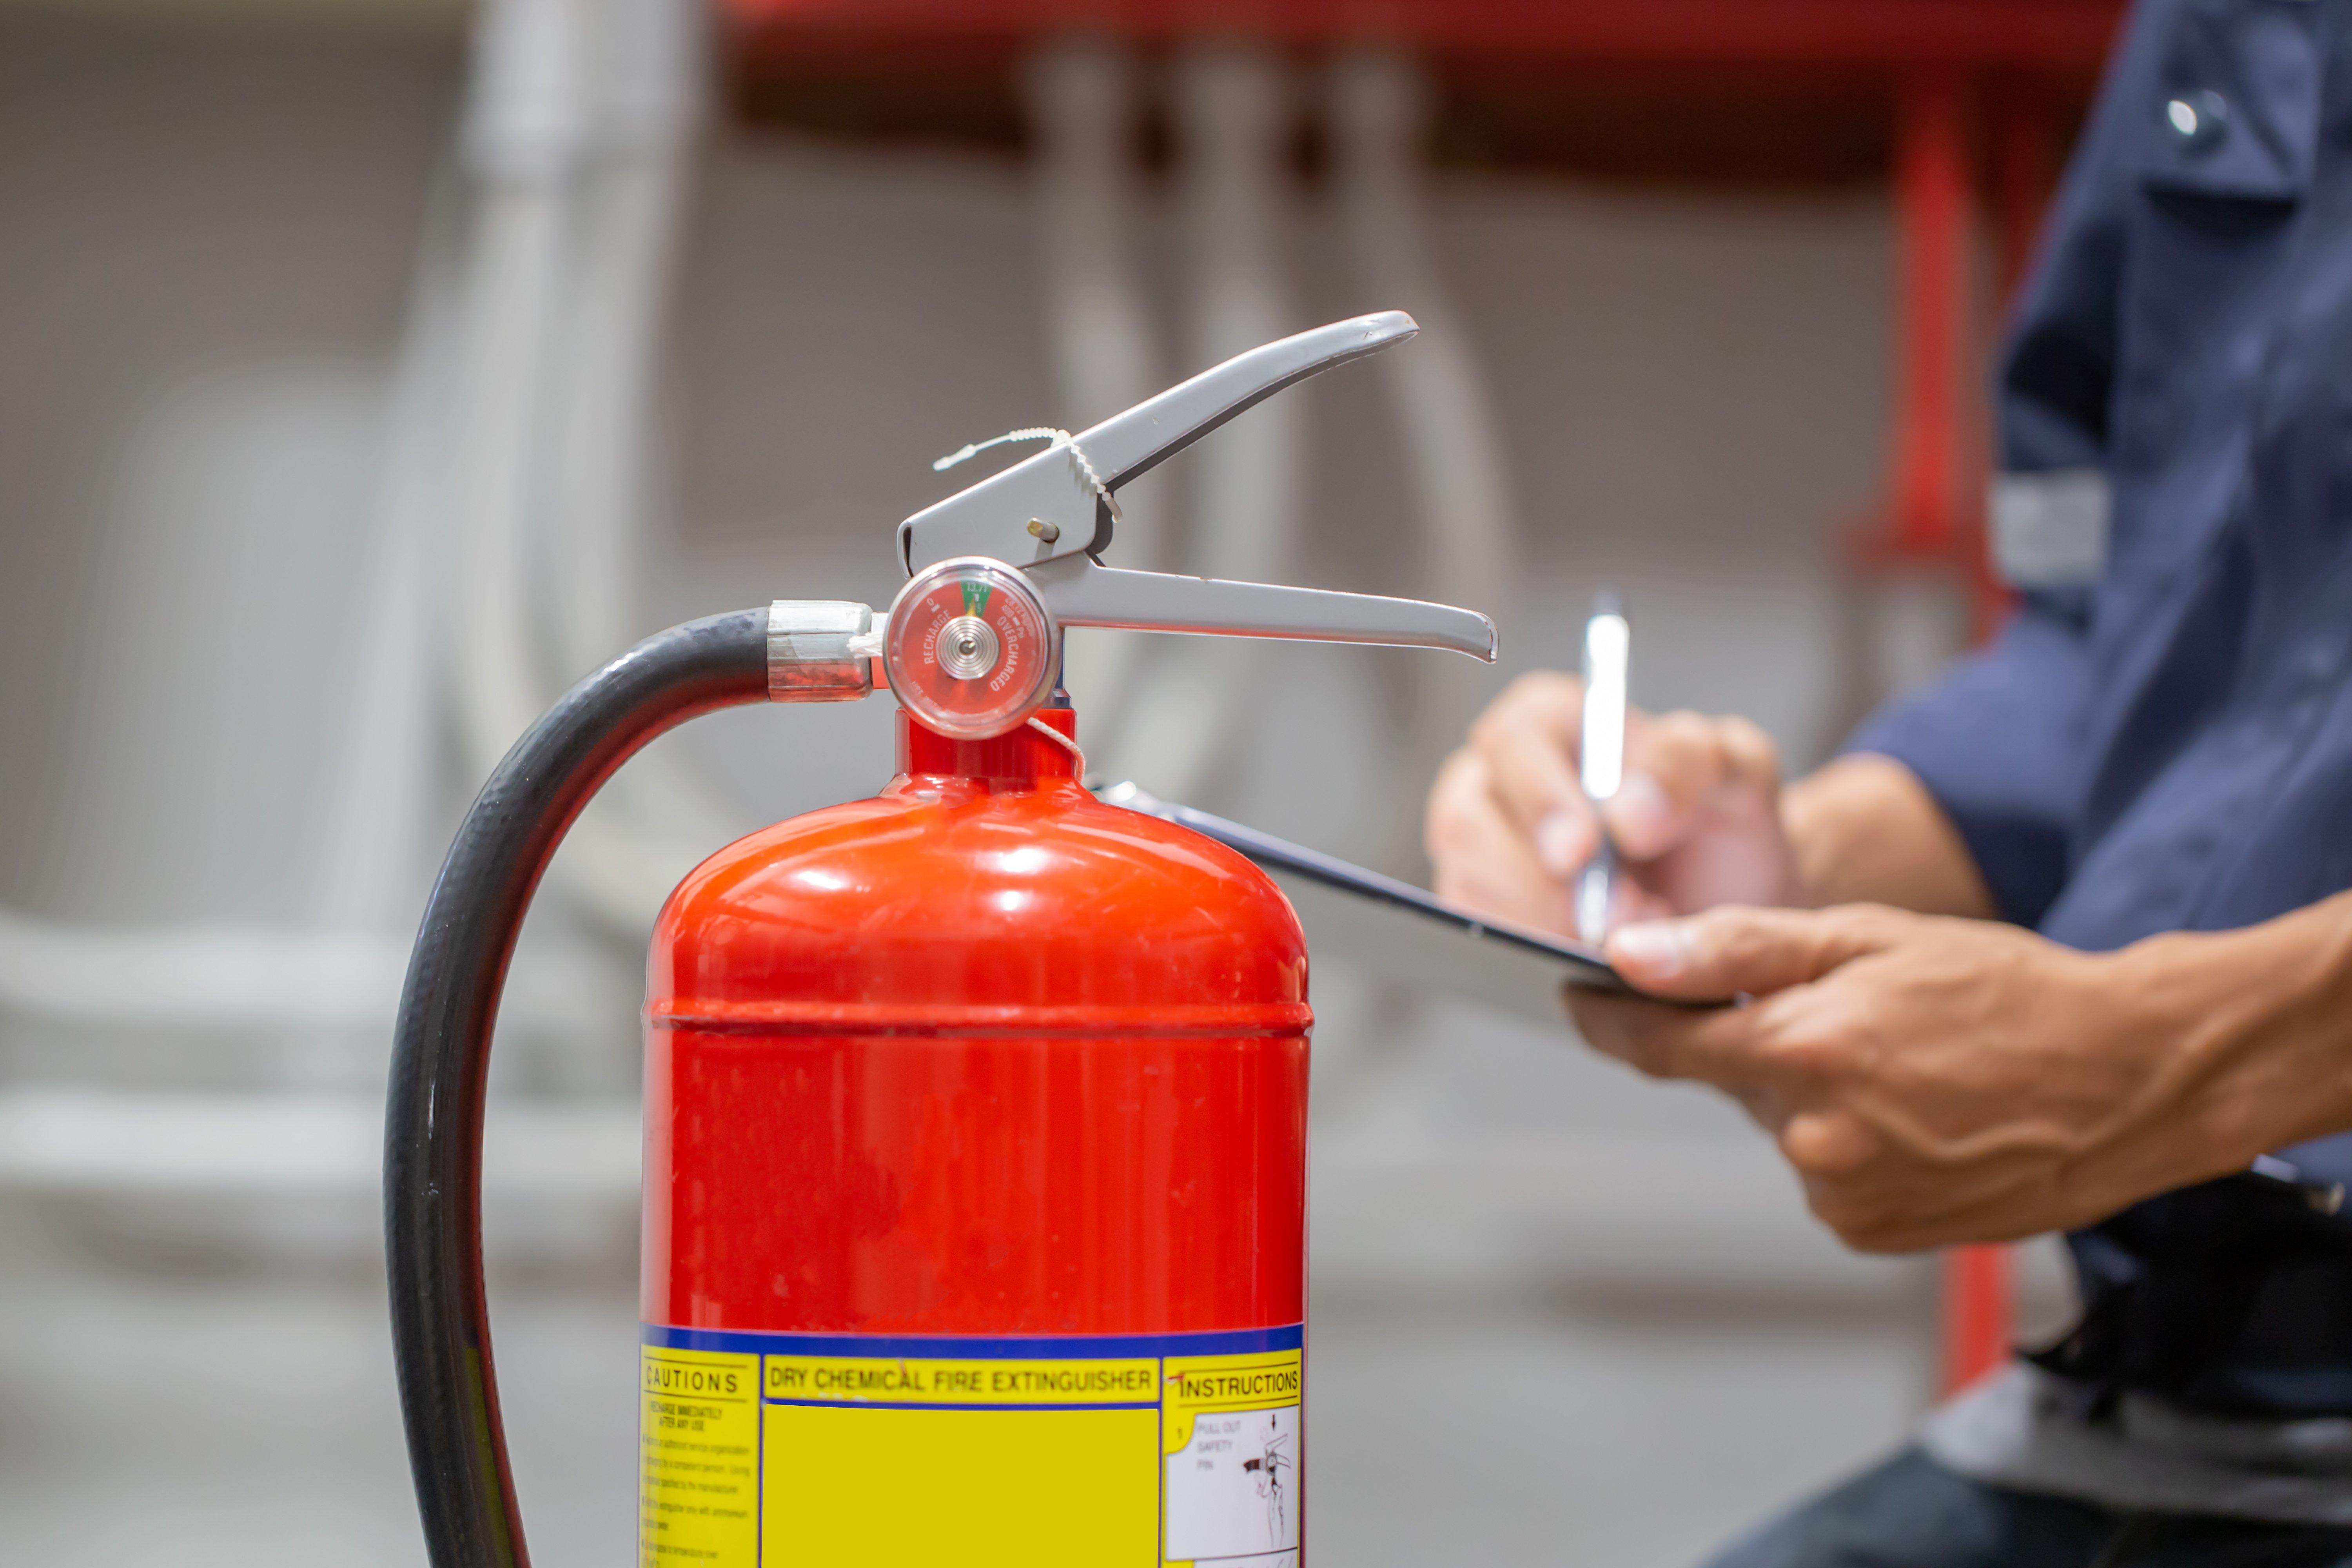 An engineer checks a fire extinguisher and writes on a clipboard in a fire control room.